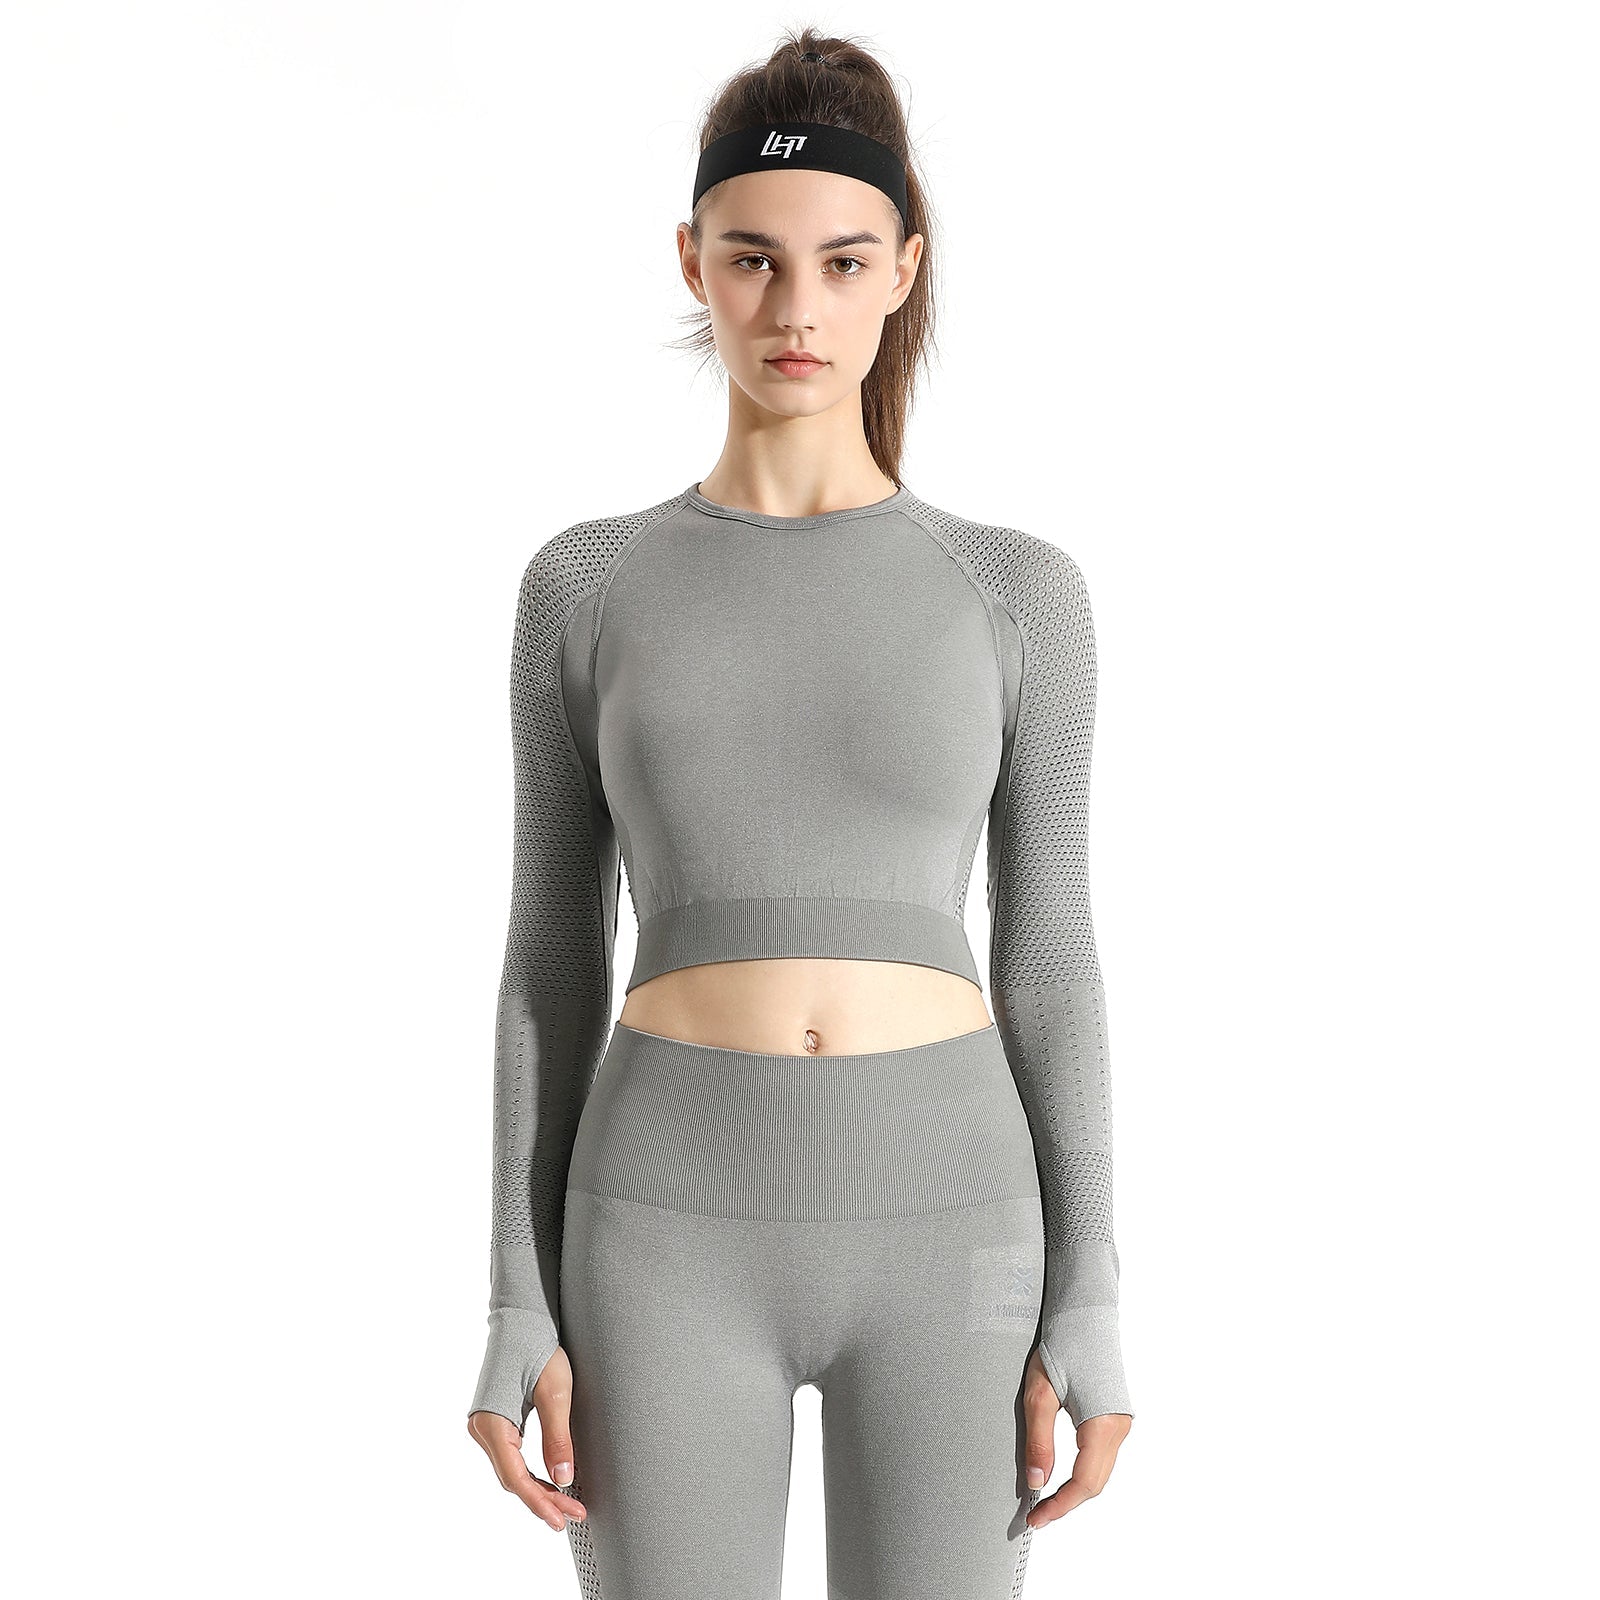 Pro-Fit Seamless High Fashion Sports Top